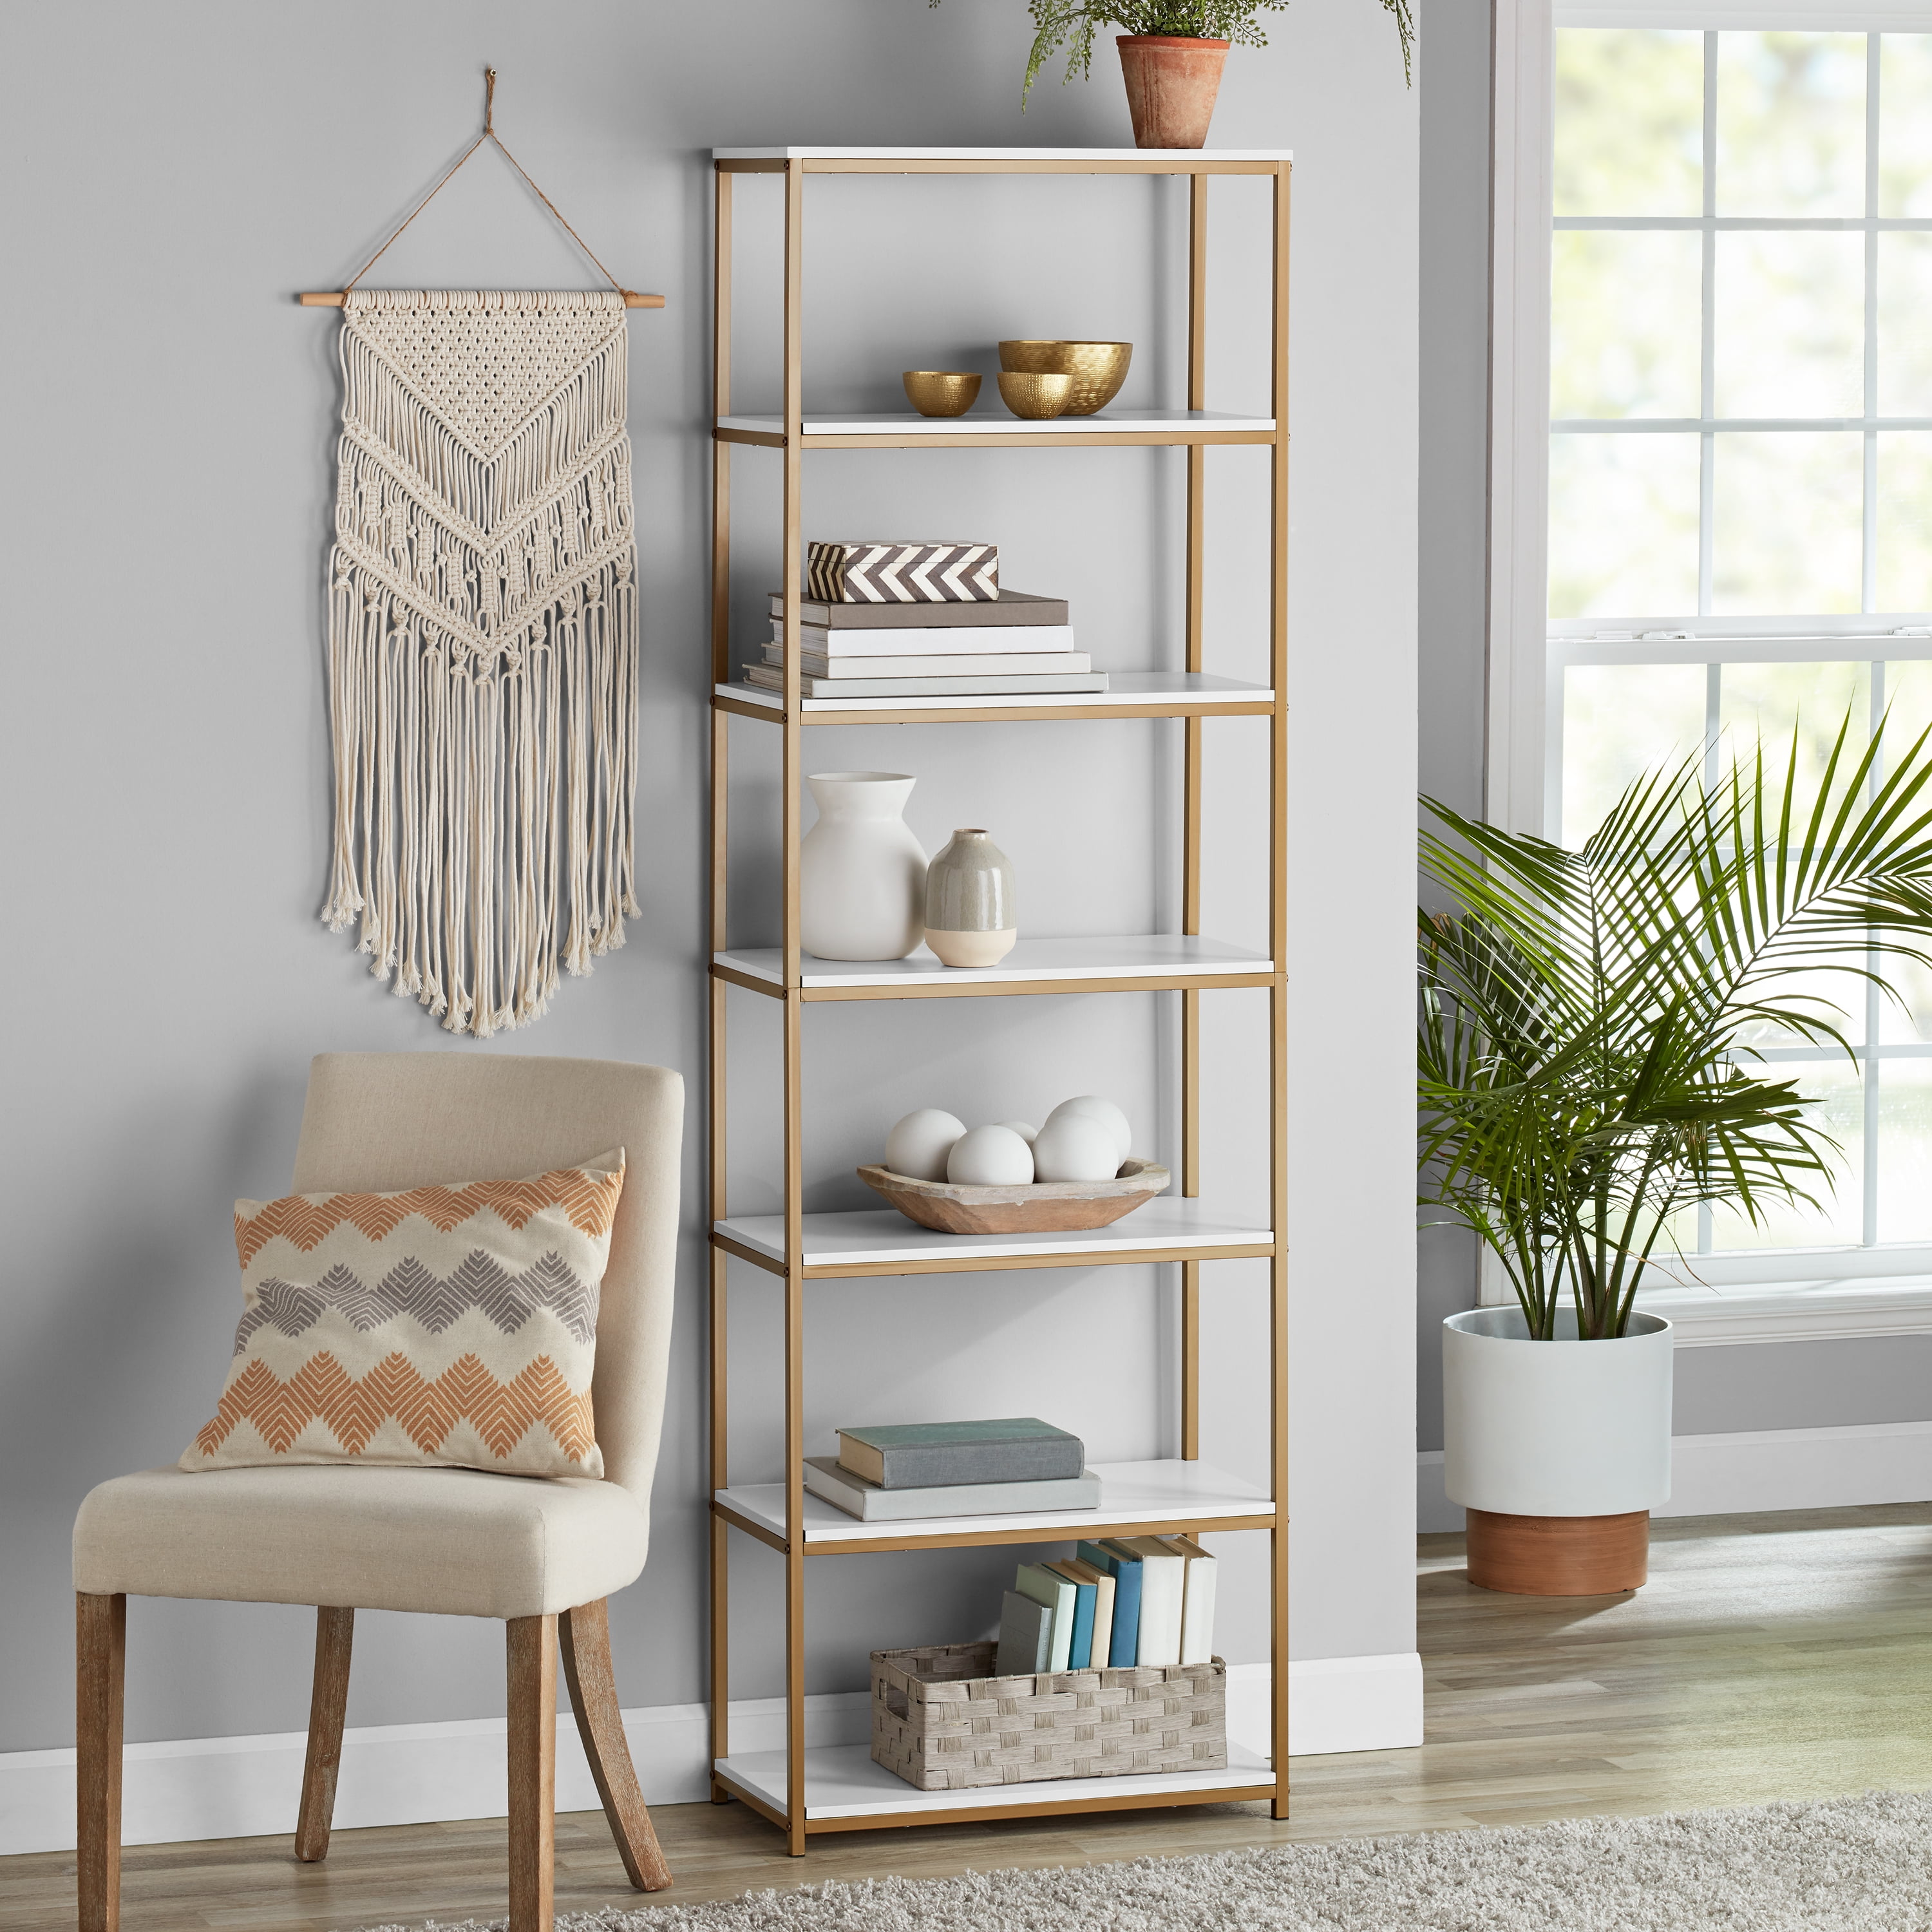 Details about   No Tools 5 Shelf Standard Open Storage Bookshelf Compact Display Rack White 